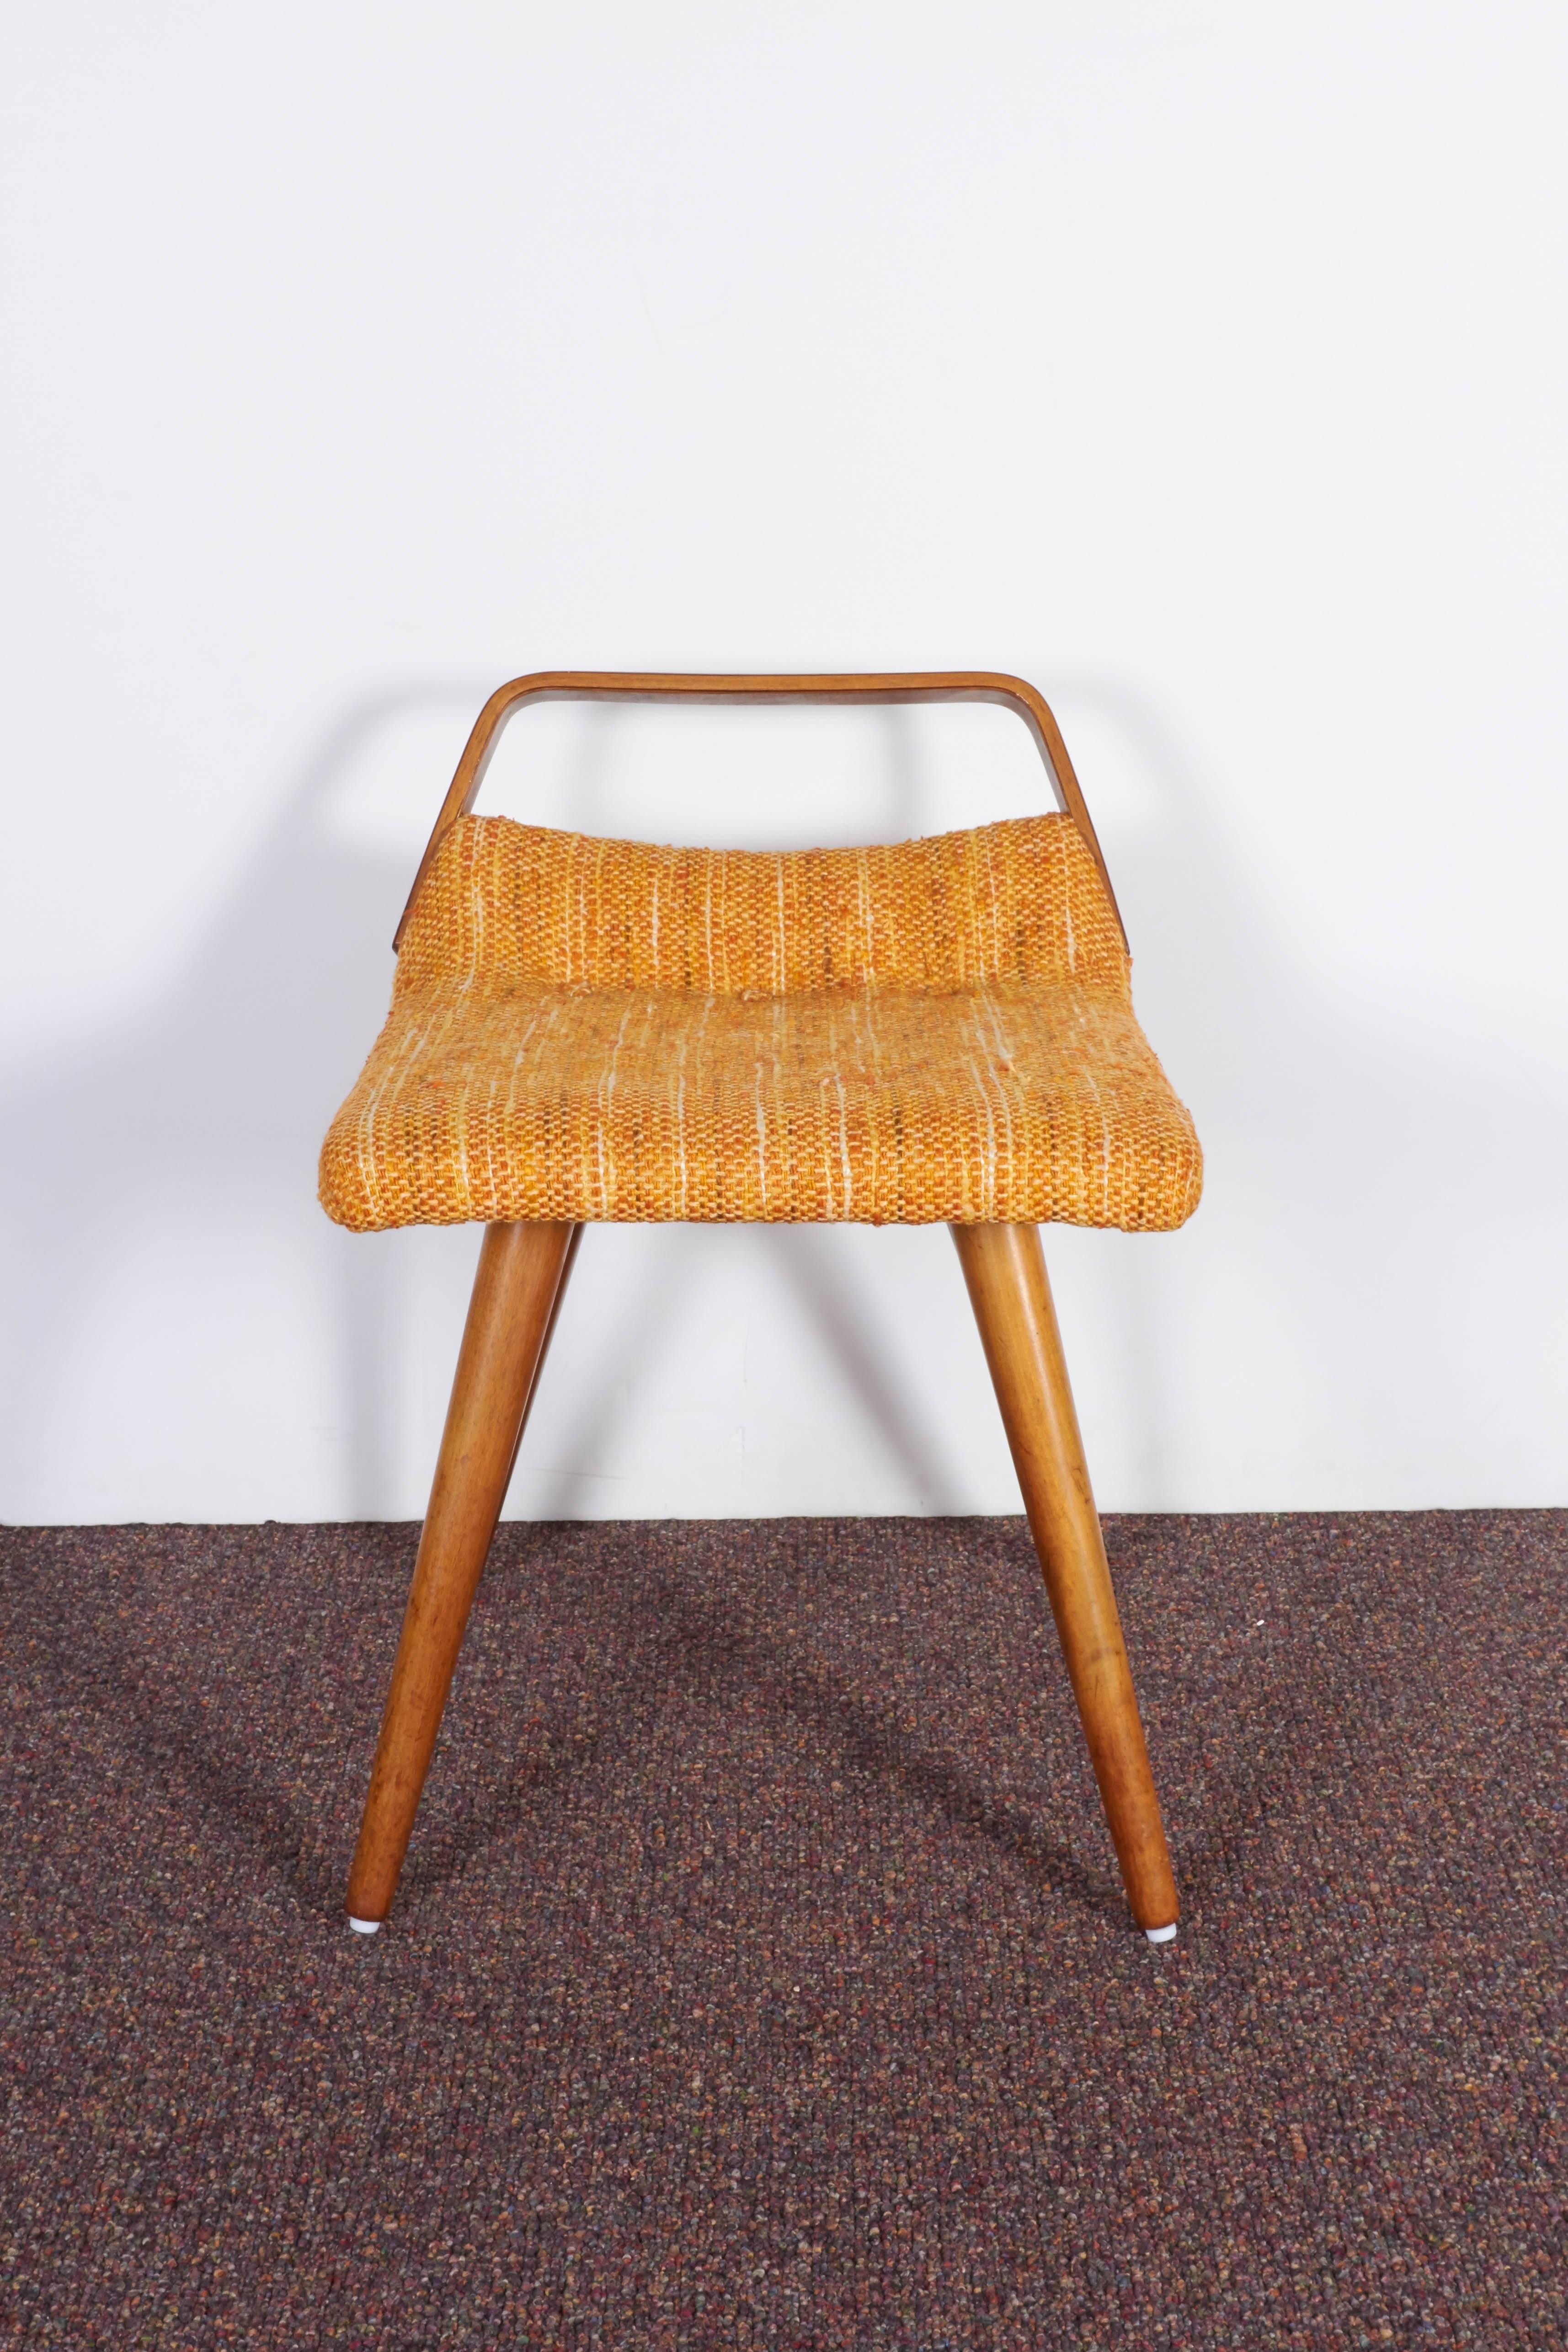 A dressing table stool, designed in the style of Dunbar, produced in the United States, circa 1960s, upholstered in the original warm colored woven fabric, against curved seat with bentwood back rail, raised on round tapered beech legs. Very good